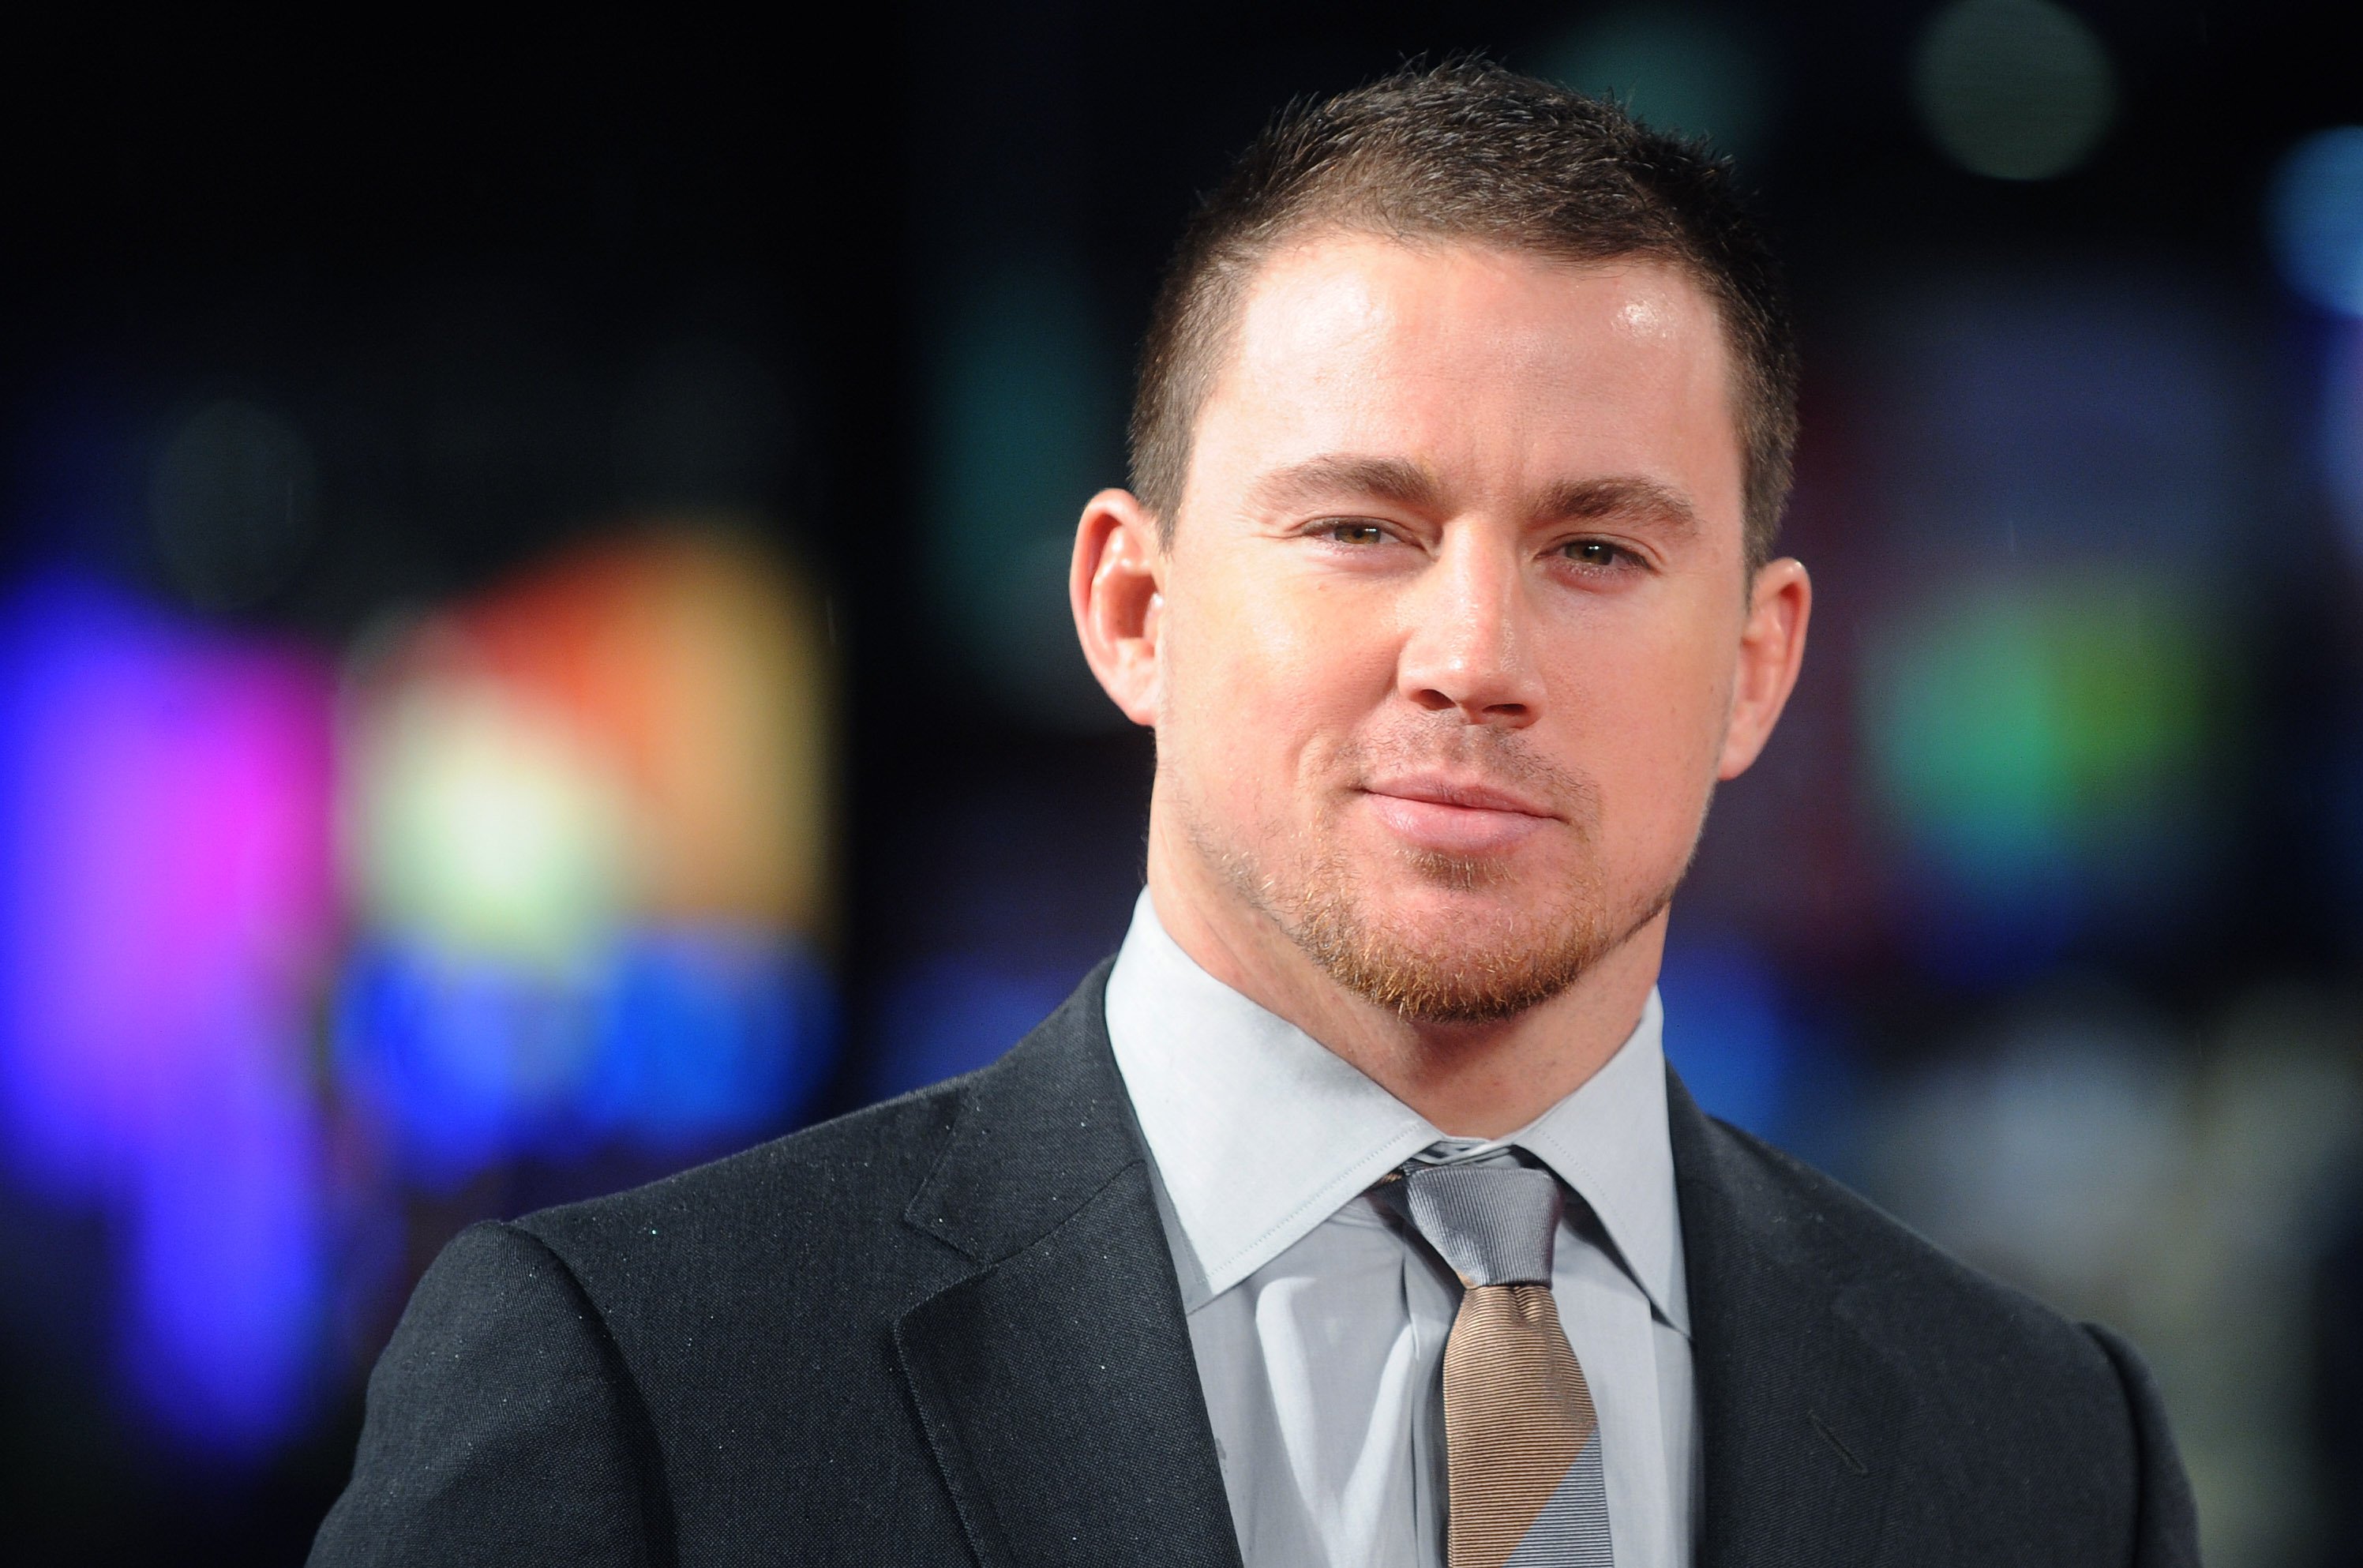 Channing Tatum in a suit while at a media event.